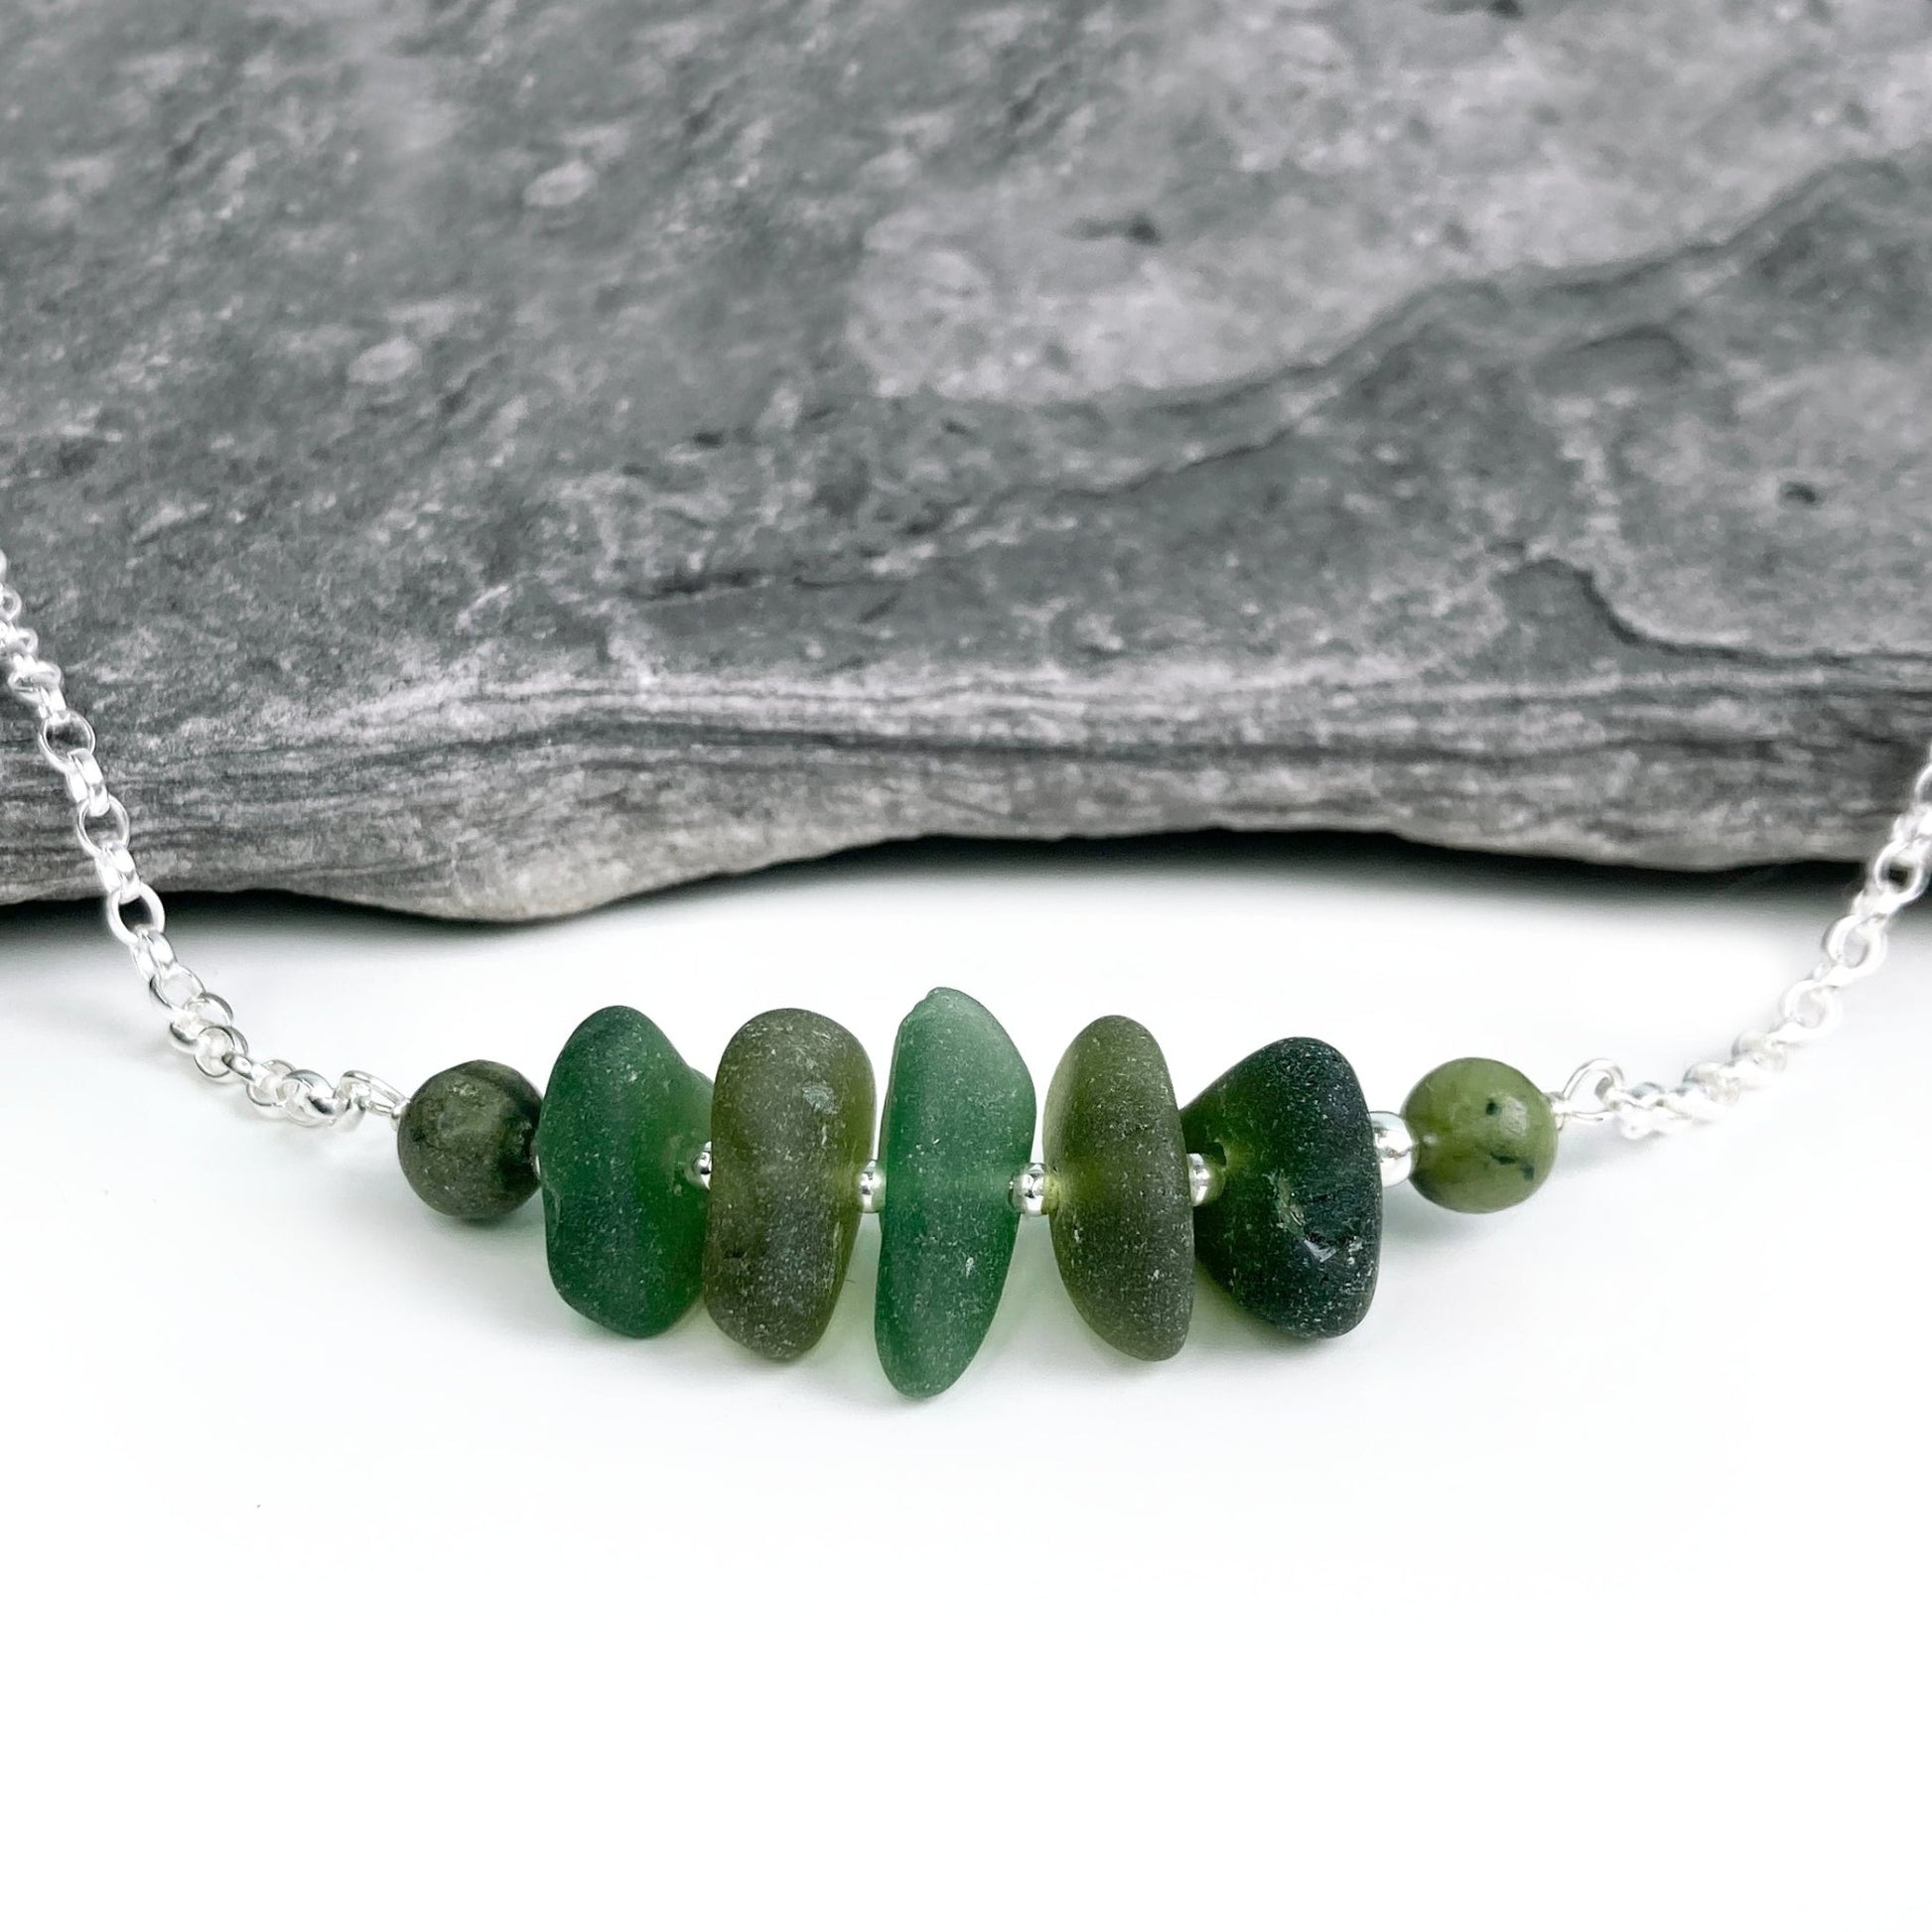 Olive Green Sea Glass Necklace with Jade Crystal Beads - Sterling Silver Scottish Jewellery - East Neuk Beach Crafts